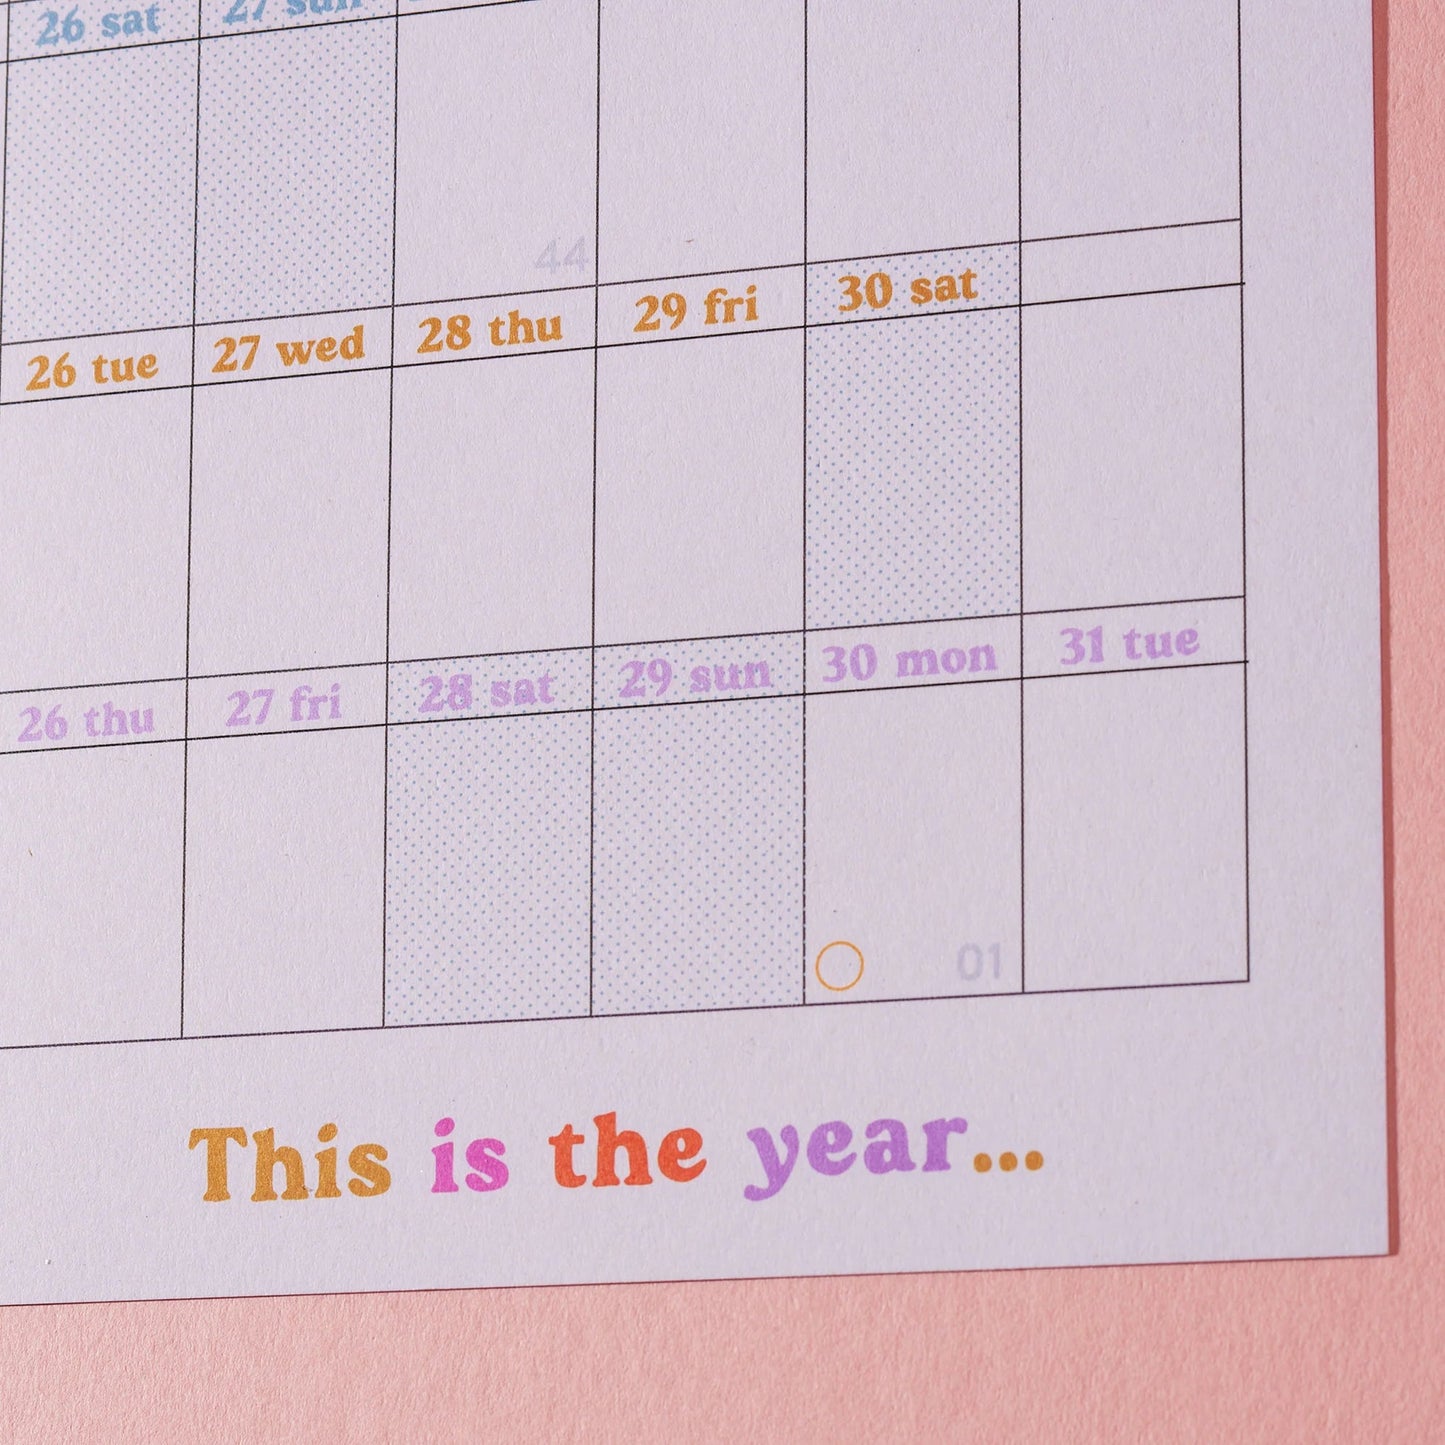 2024 Year Wall Planner - Landscape - The Stationery Cupboard